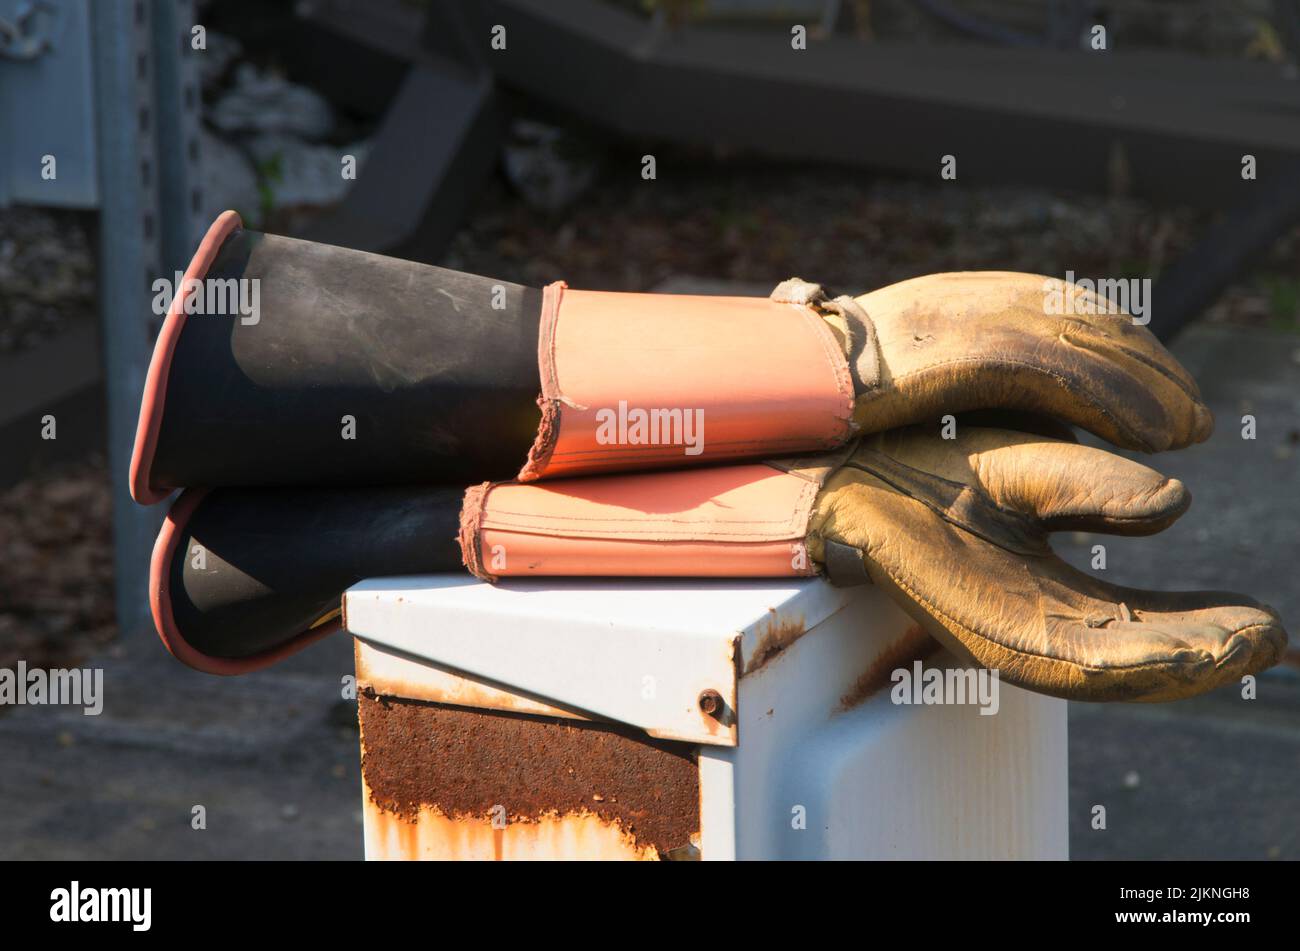 2,958 Utility Glove Images, Stock Photos, 3D objects, & Vectors